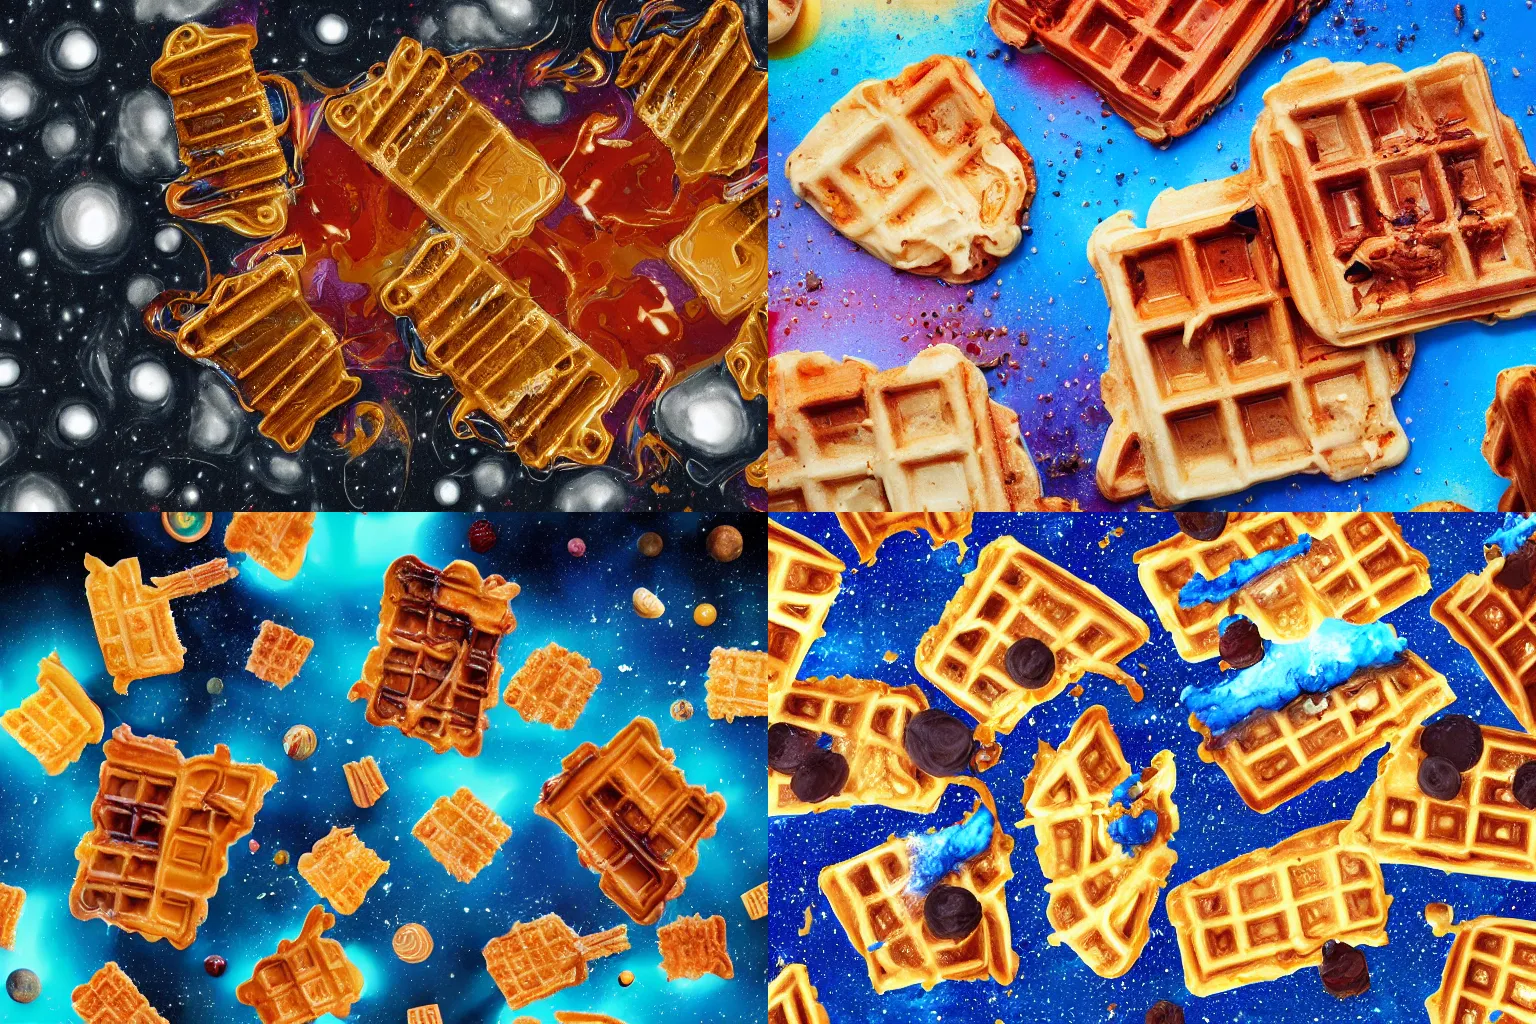 Prompt: abstract surreal melted waffles for breakfast in space